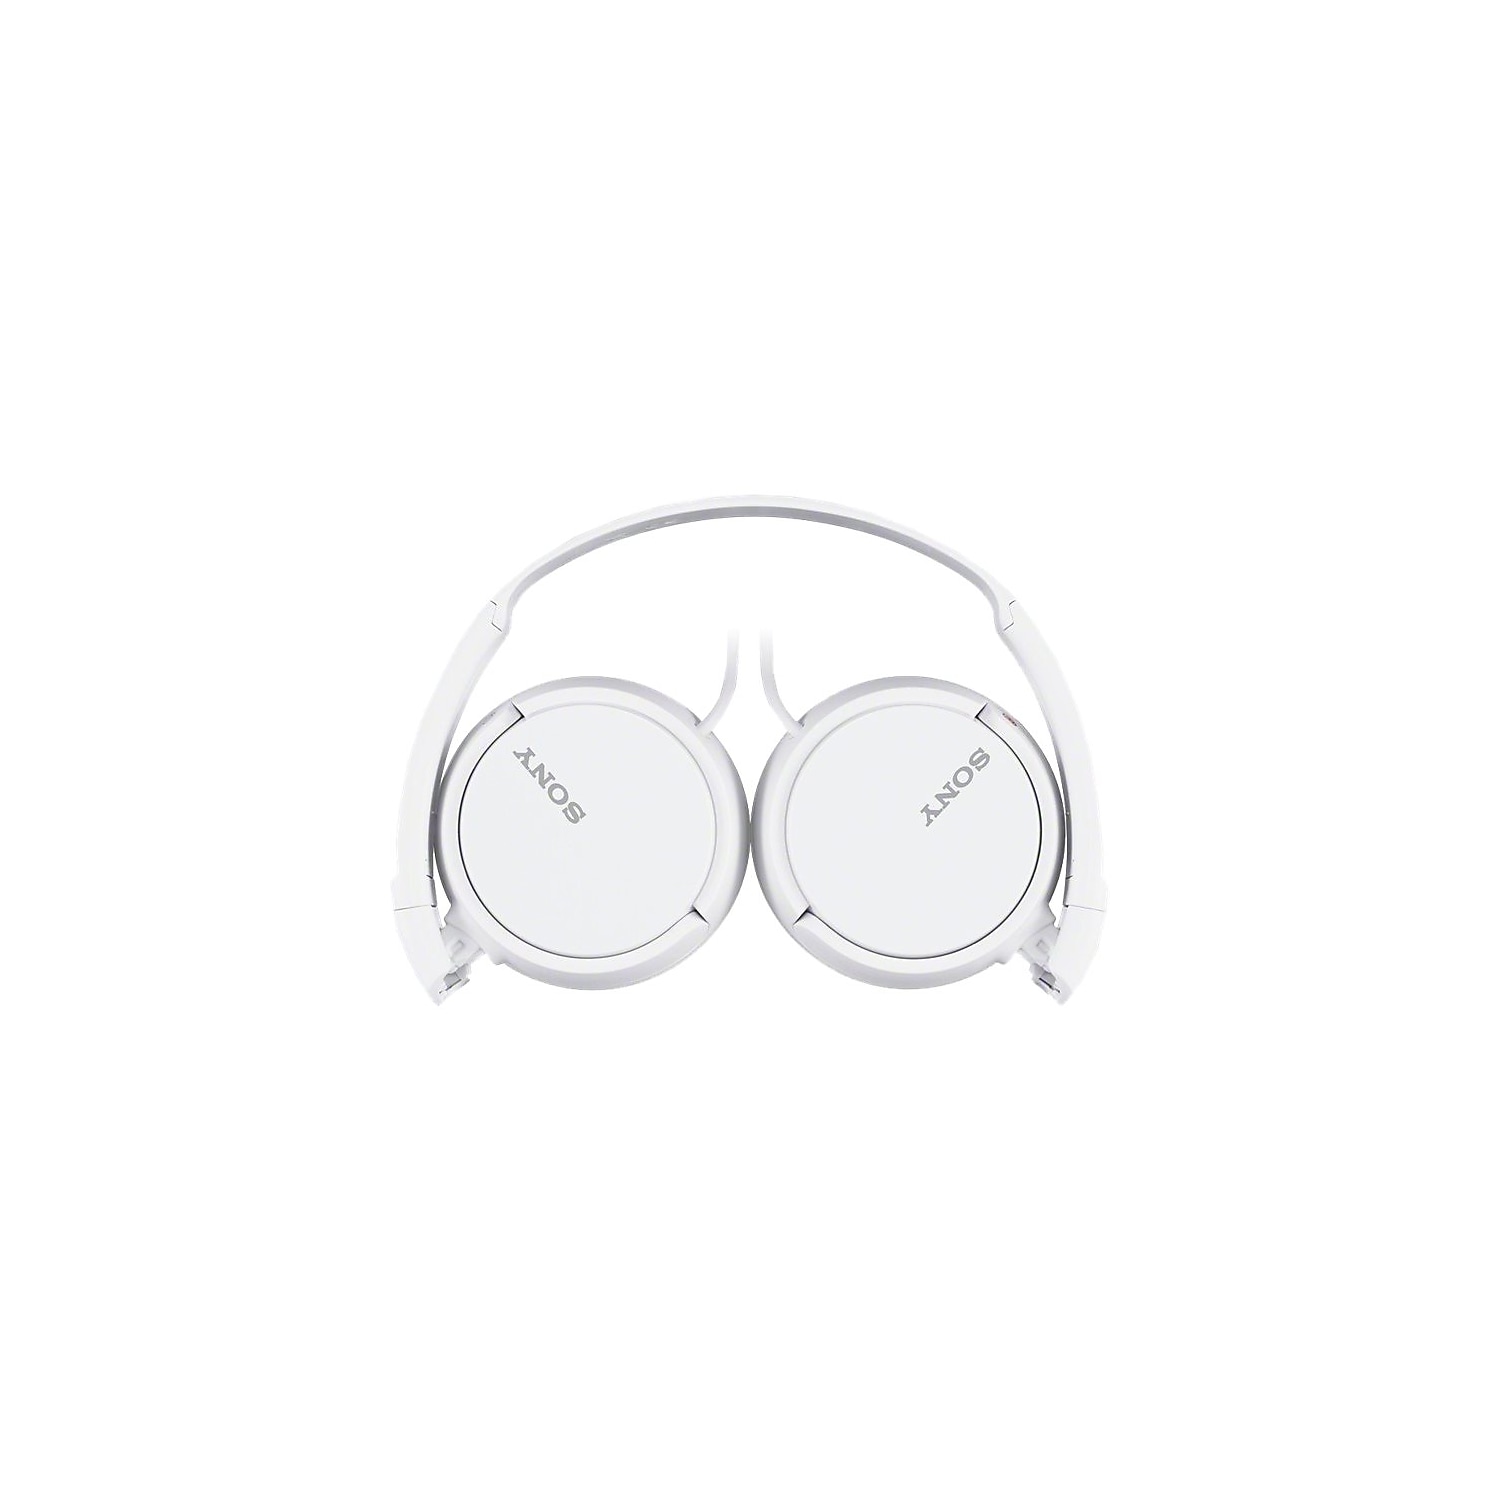 Sony MDR-ZX100/WHI - ZX Series - headphones - full size - wired - 3.5 mm jack - white - image 2 of 2